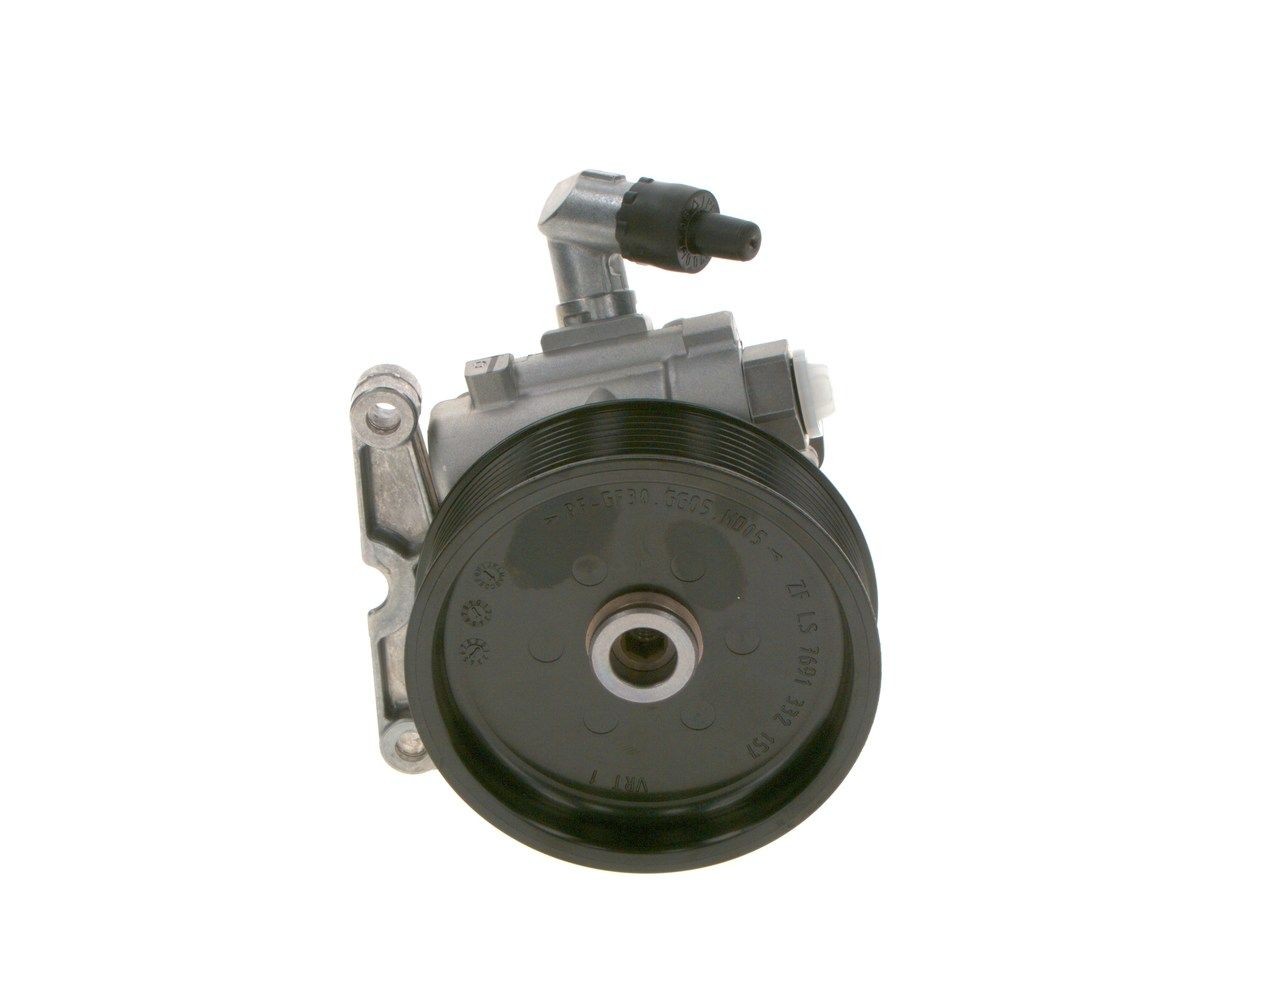 BOSCH Hydraulic steering pump K S00 000 704 suitable for MERCEDES-BENZ ML-Class, GL